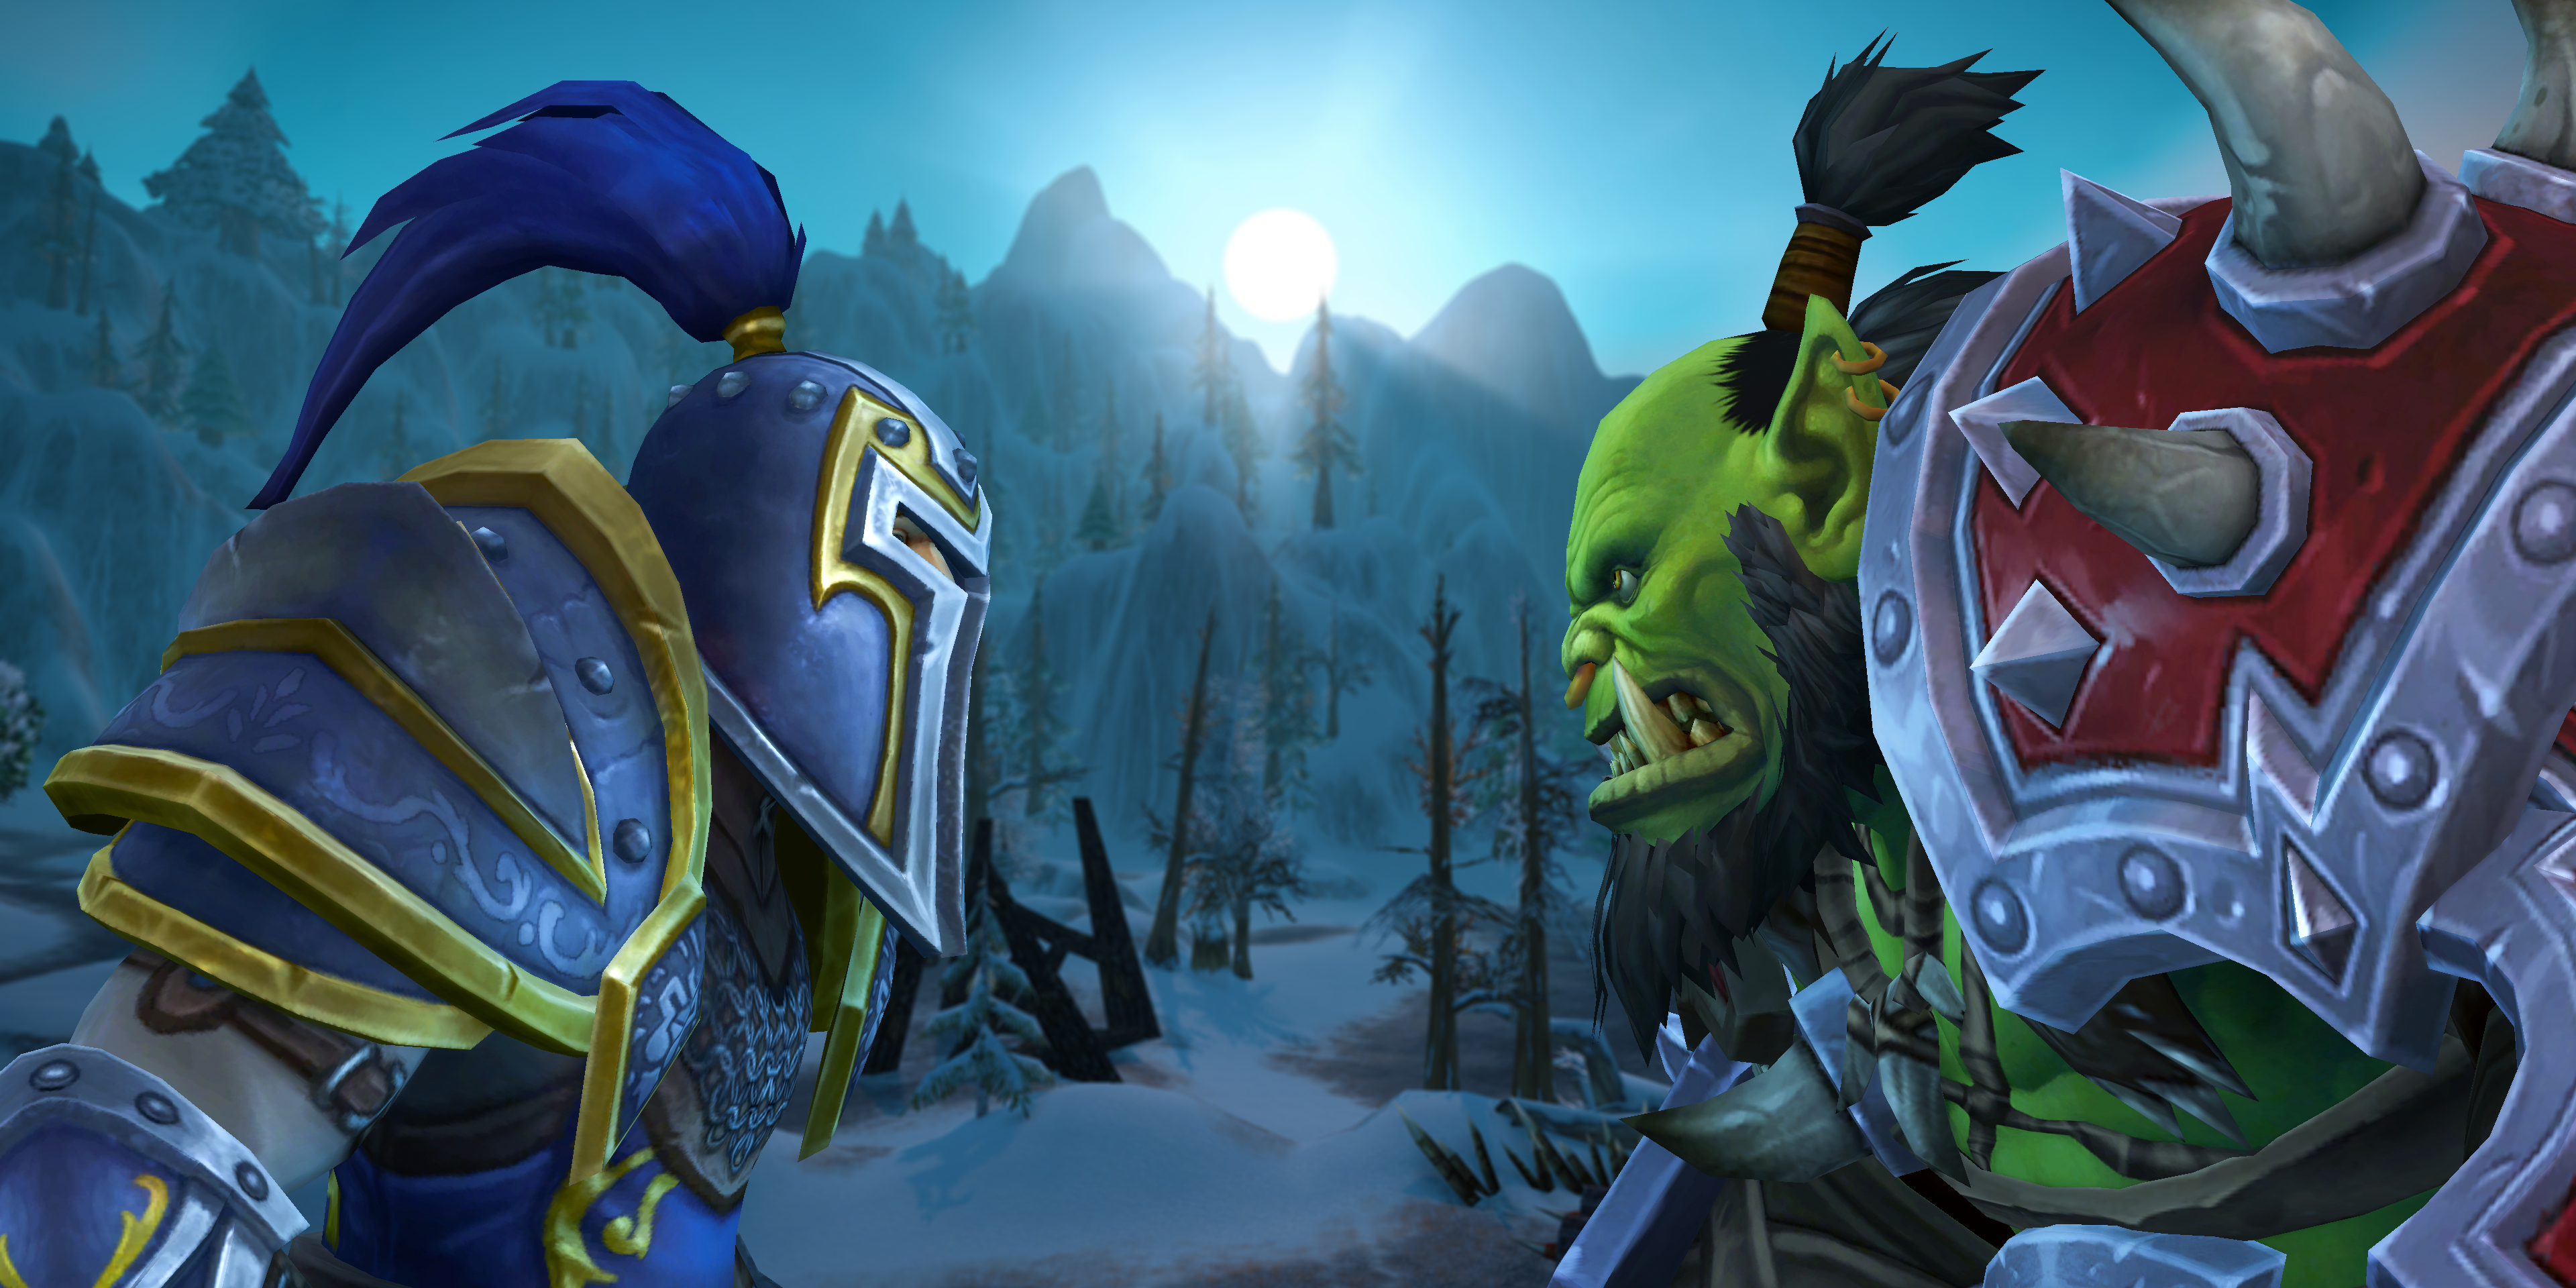 A human in regal knight armor stands looking into the eyes of an orc in classic Warcraft armor